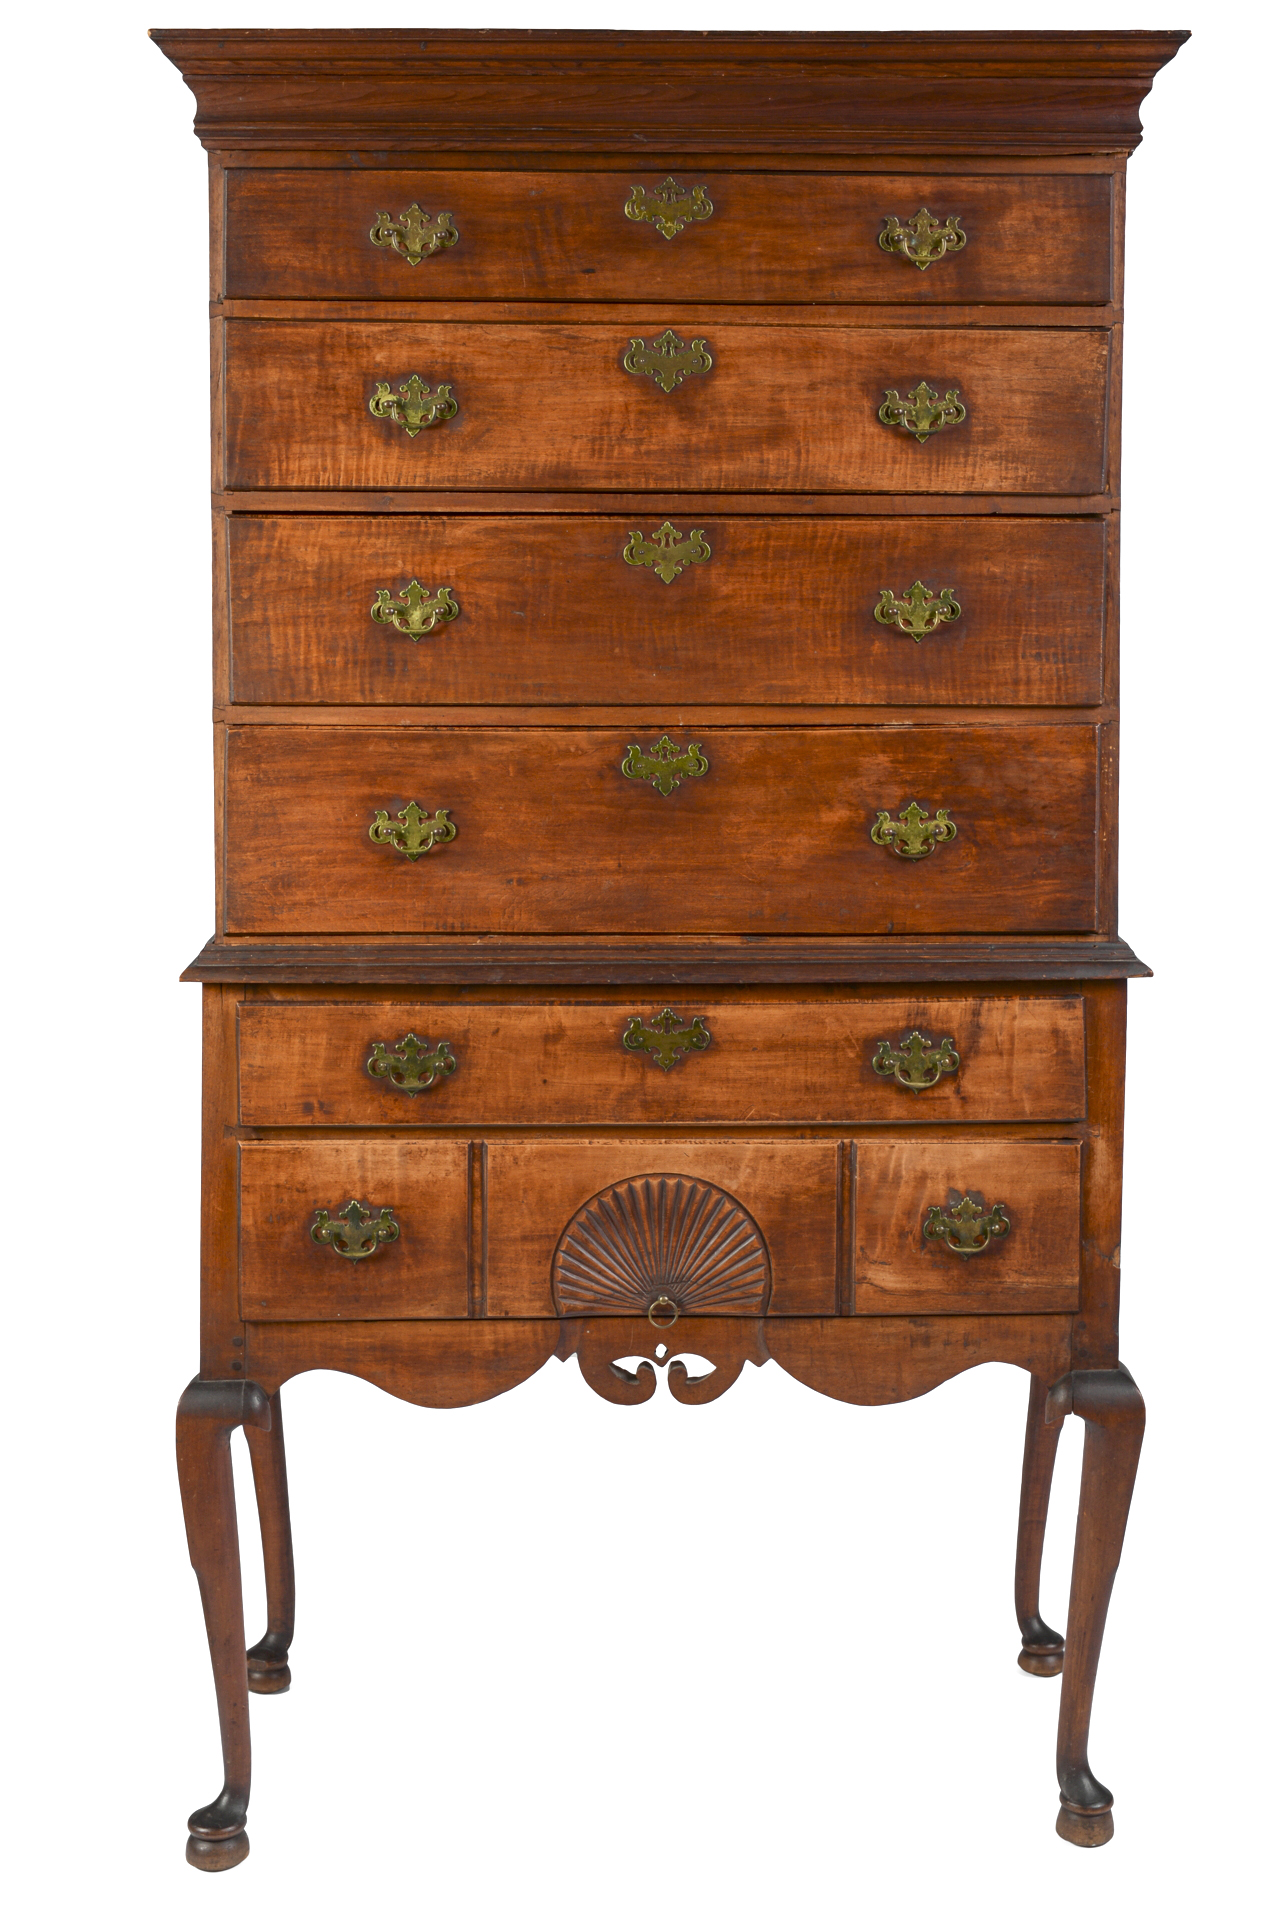 A fine early Queen Anne figured maple and pine high chest